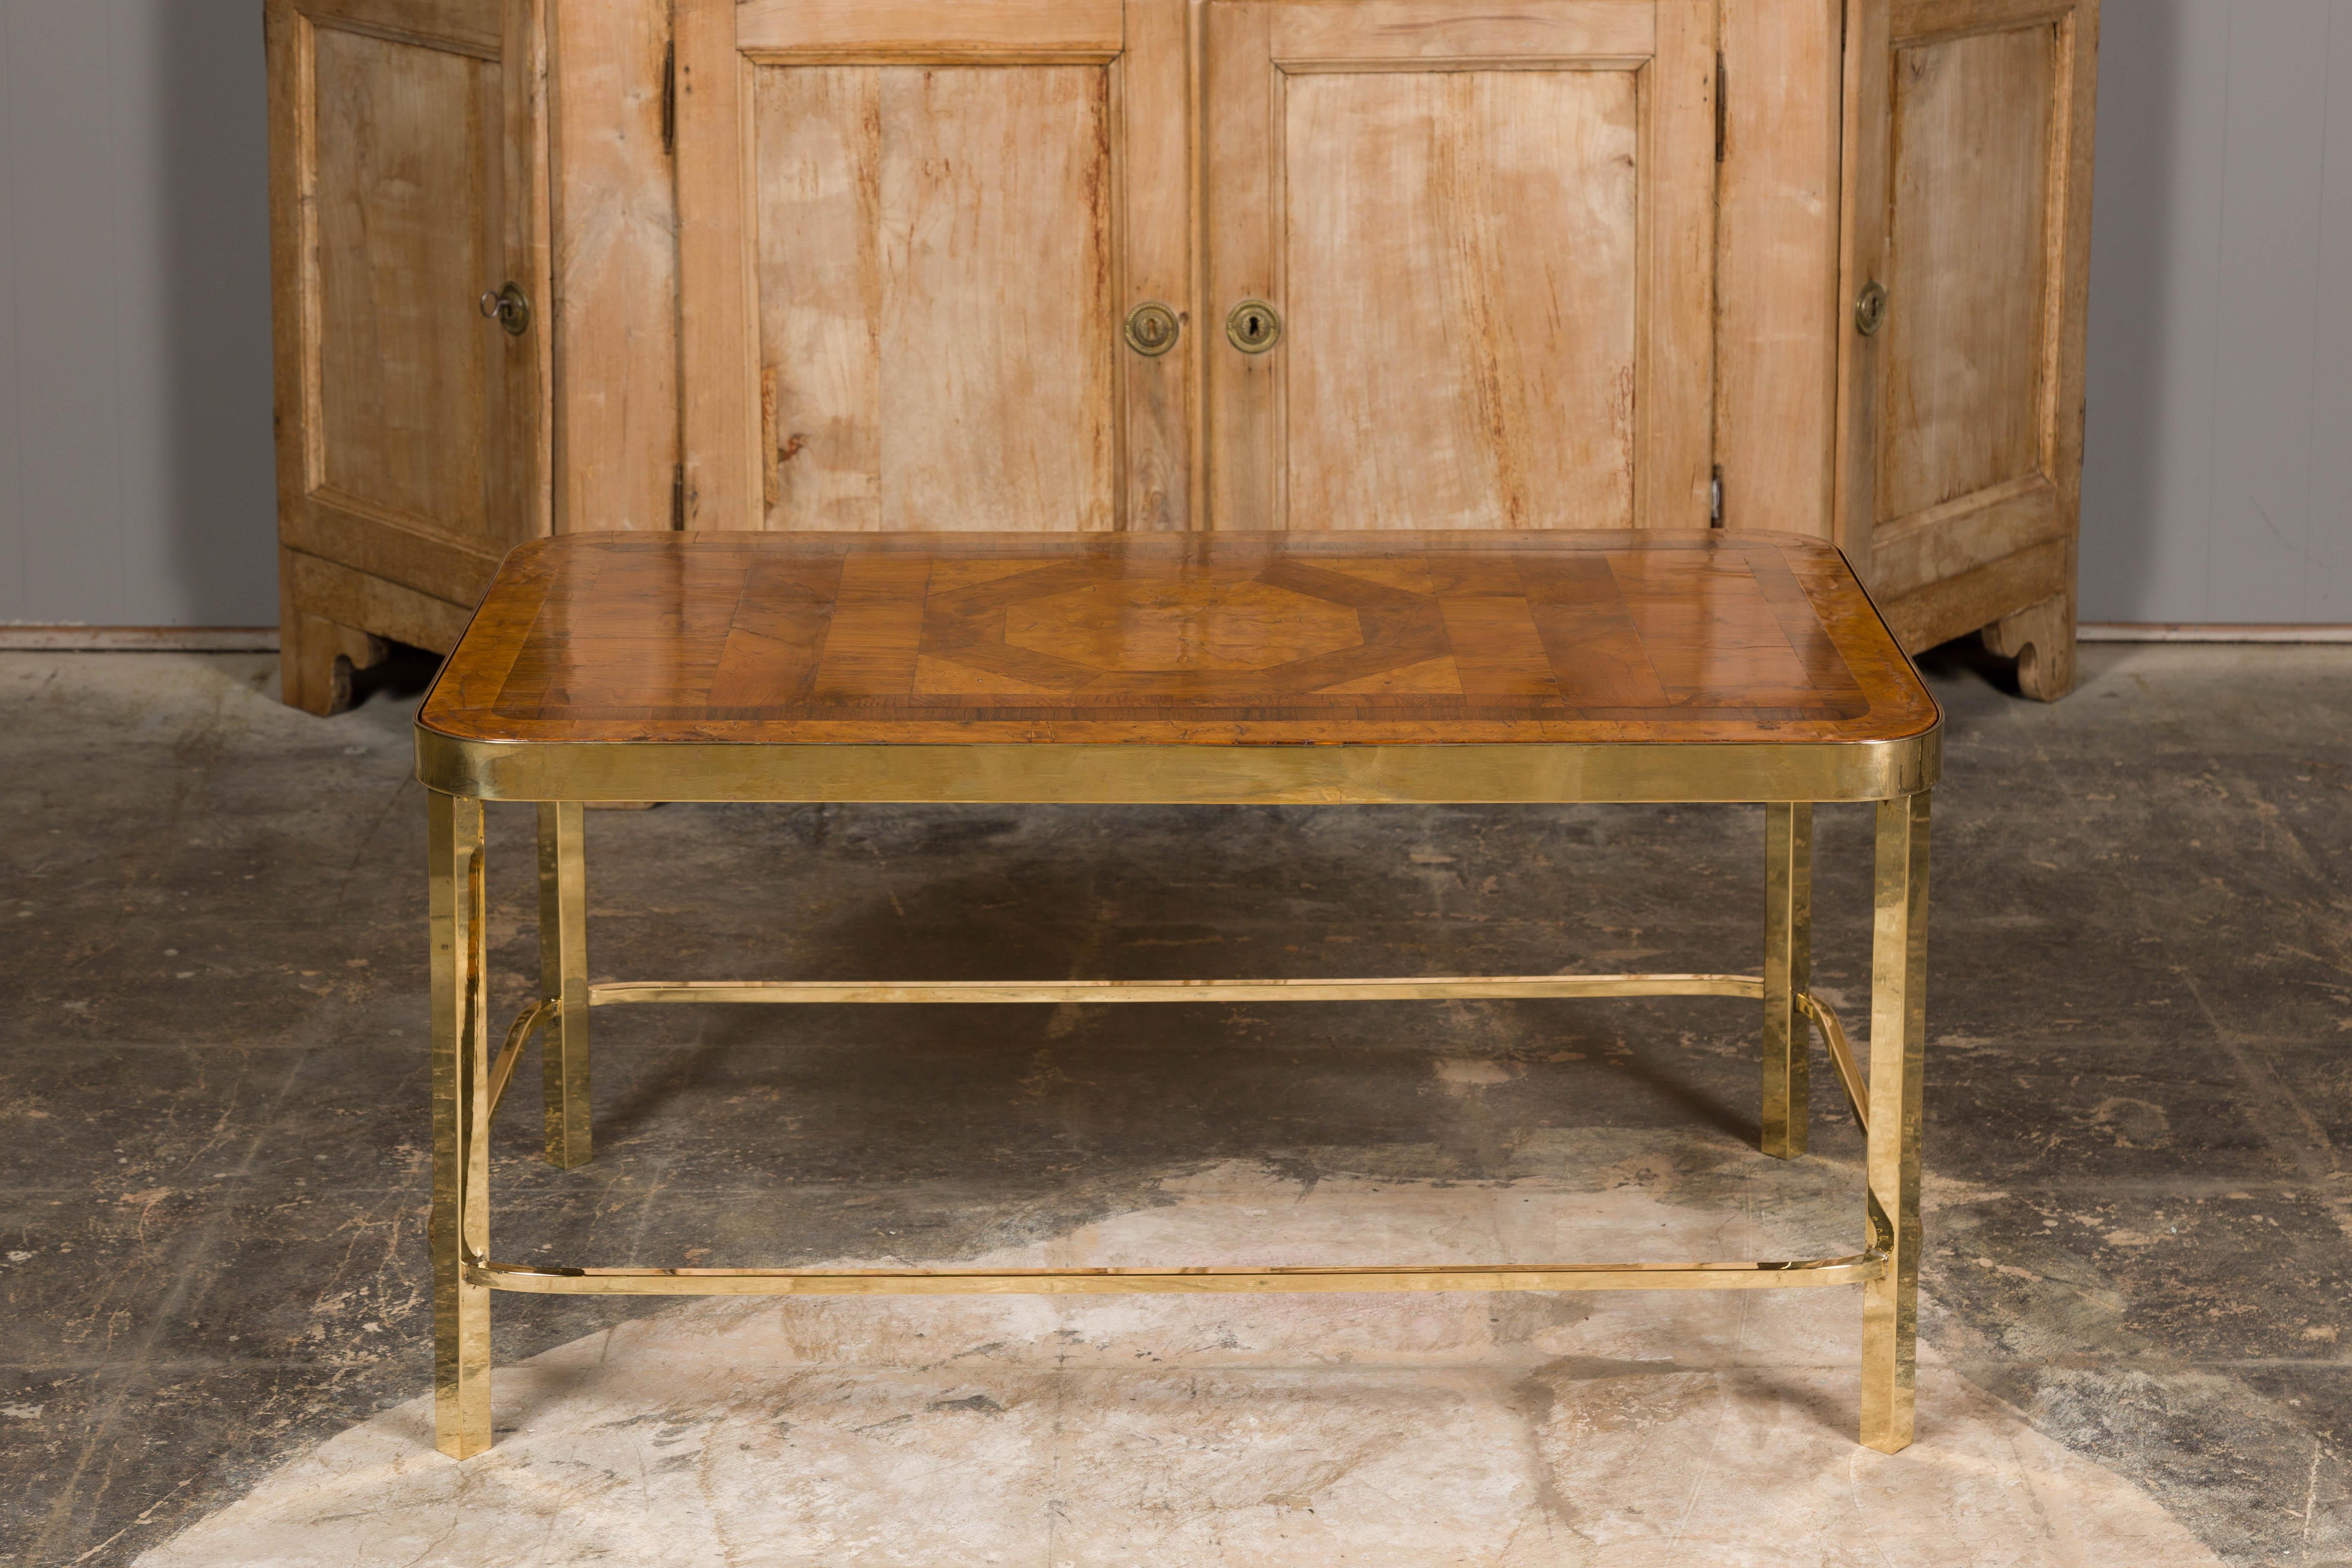 A French Art Deco period coffee table from circa 1930 with parquetry top and brass base. Elevate your living space with this exquisite French Art Deco coffee table, a timeless masterpiece hailing from the glamorous 1930s. With its striking parquetry